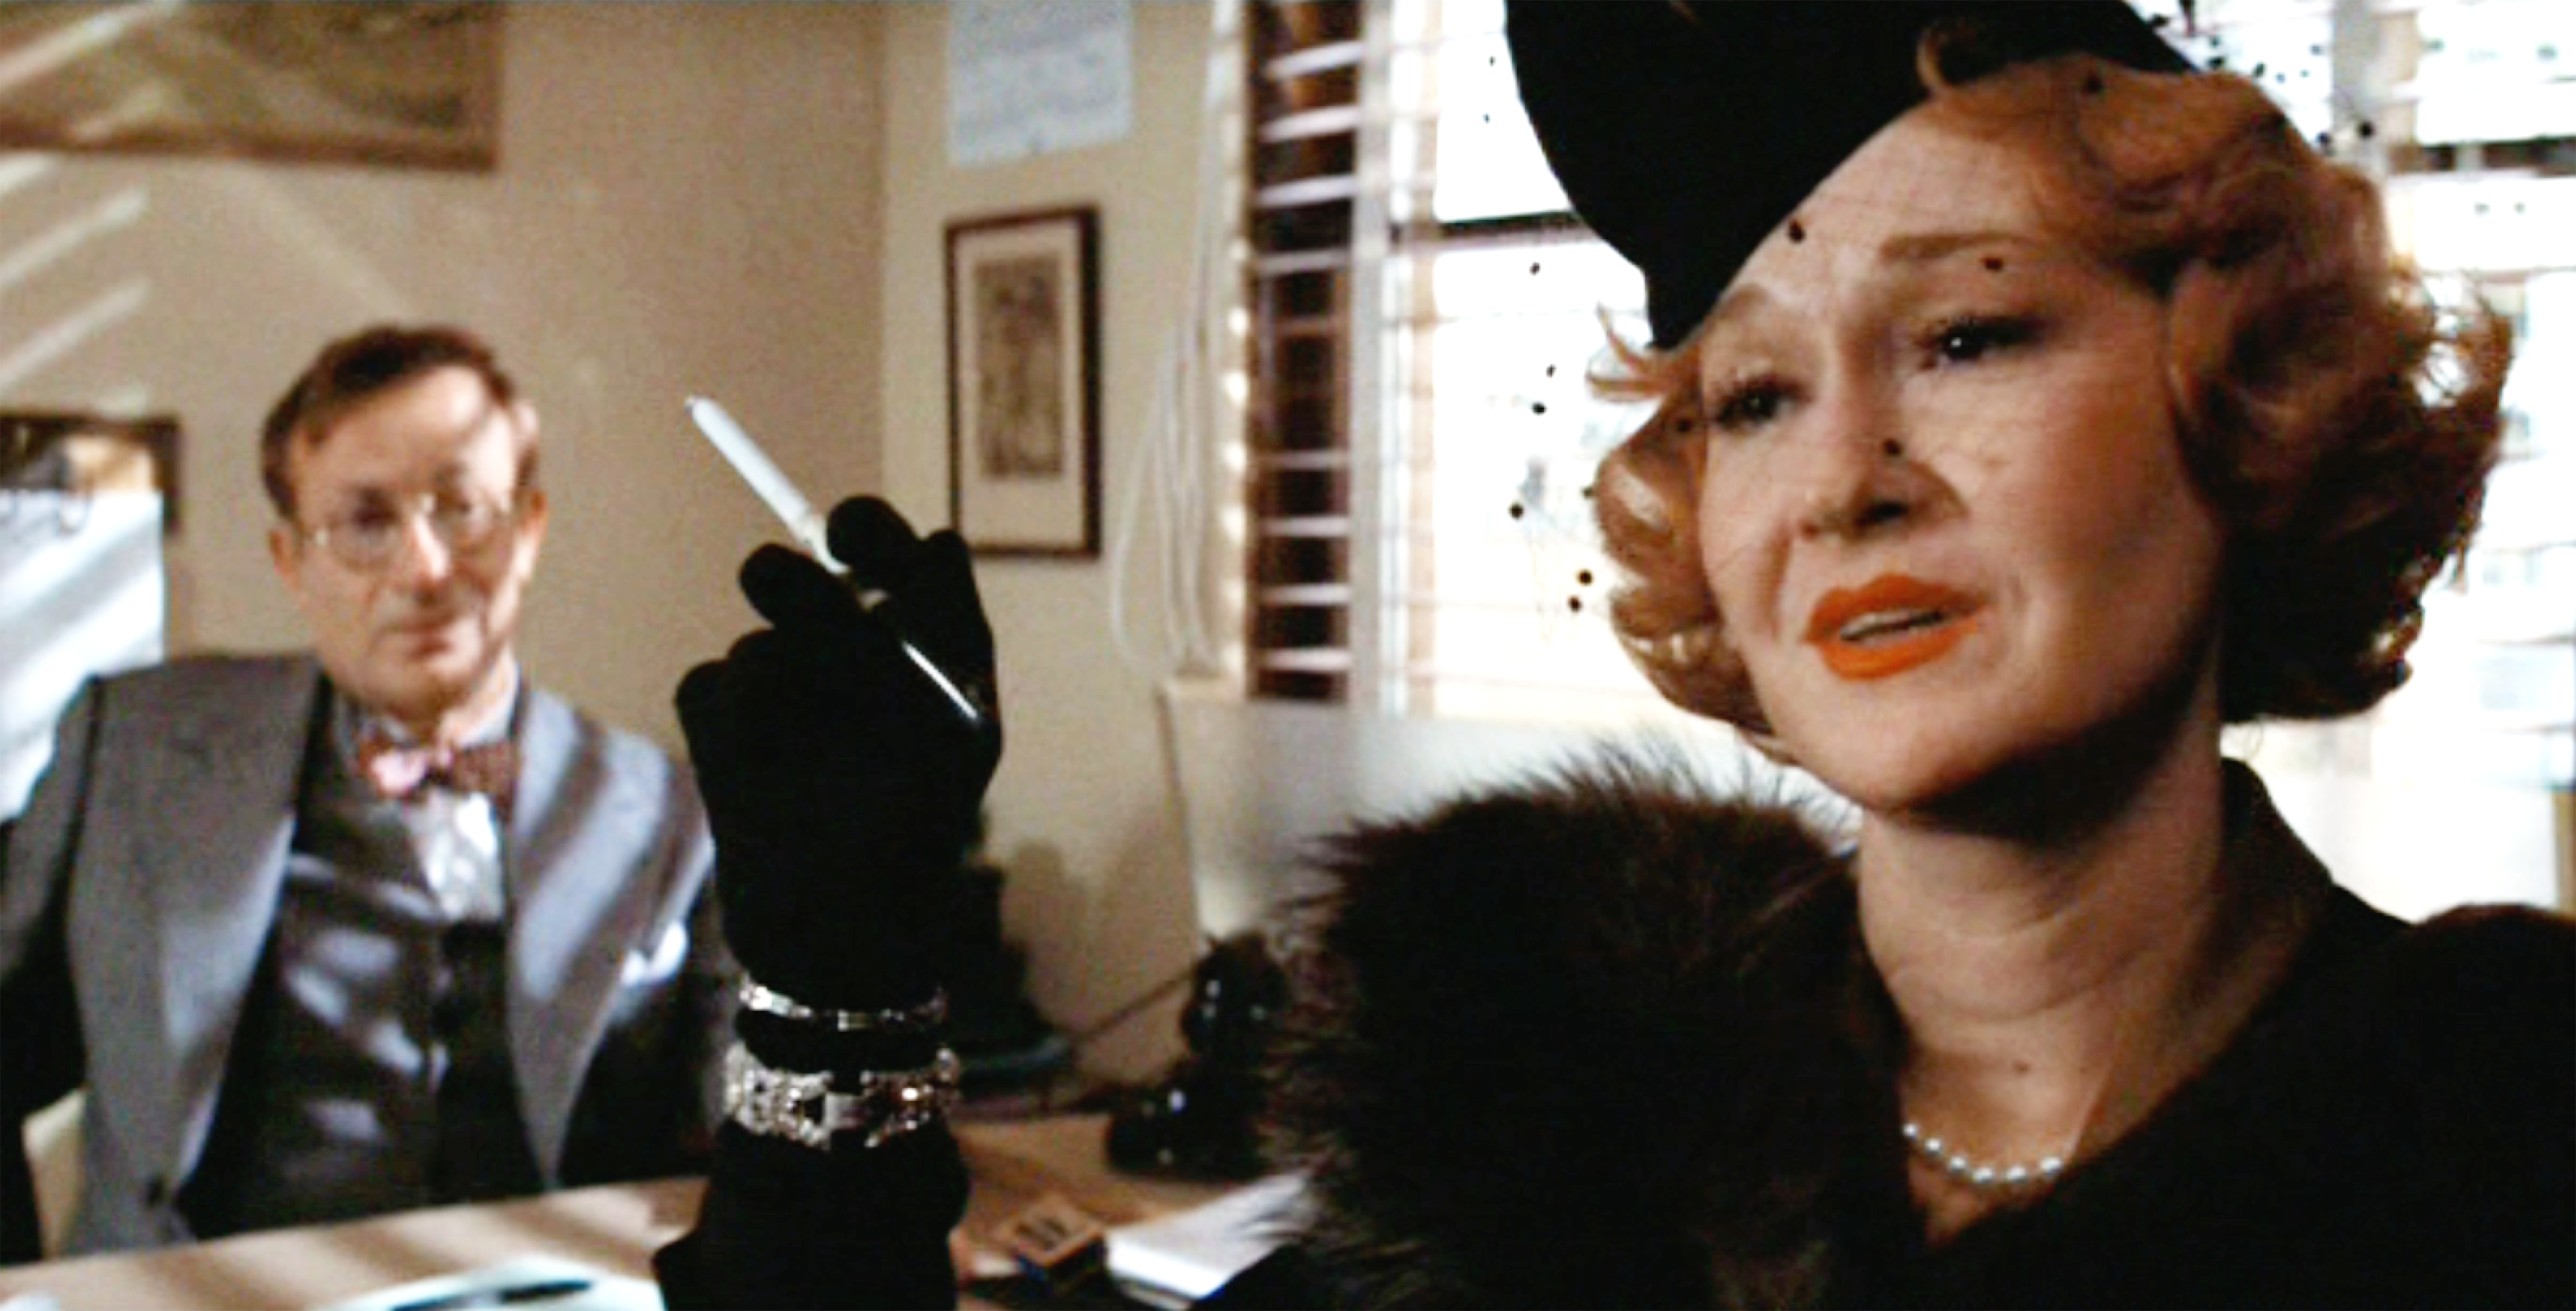 Diane Ladd, wearing a had and holding a cigarette, as Ida Sessions in 'Chinatown'